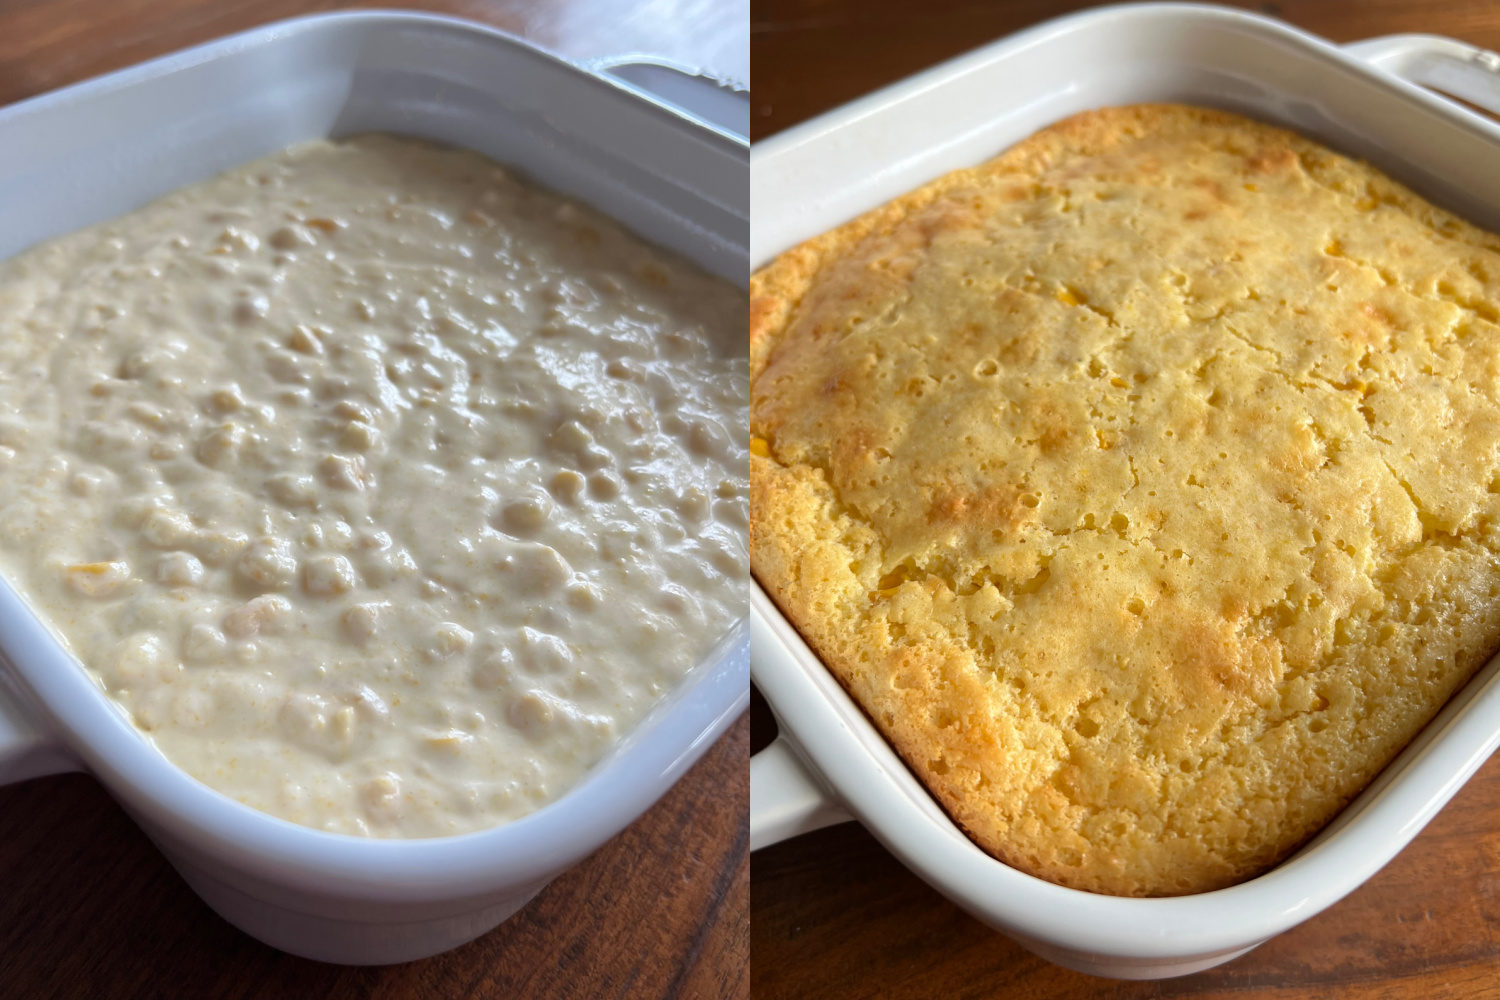 This is a 2 photo collage. These photos show before and after of the casserole in a white square baking dish. Left photo is the casserole with raw batter. Right photo shows the casserole after baking. 